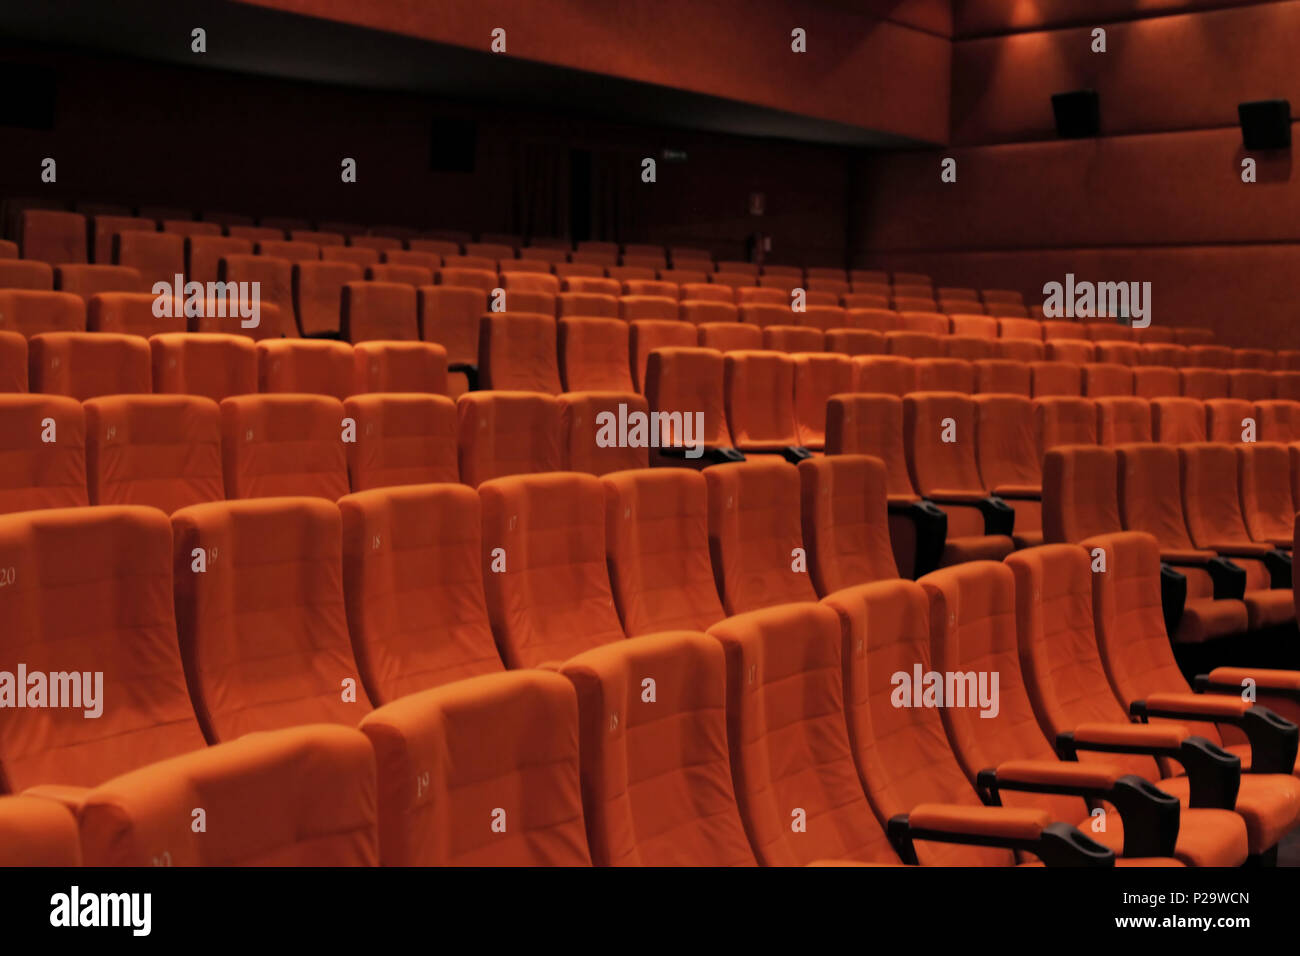 Red velvet seats in row and walls of a cinema or theater / theatre stage. Interior, angled shot. Stock Photo